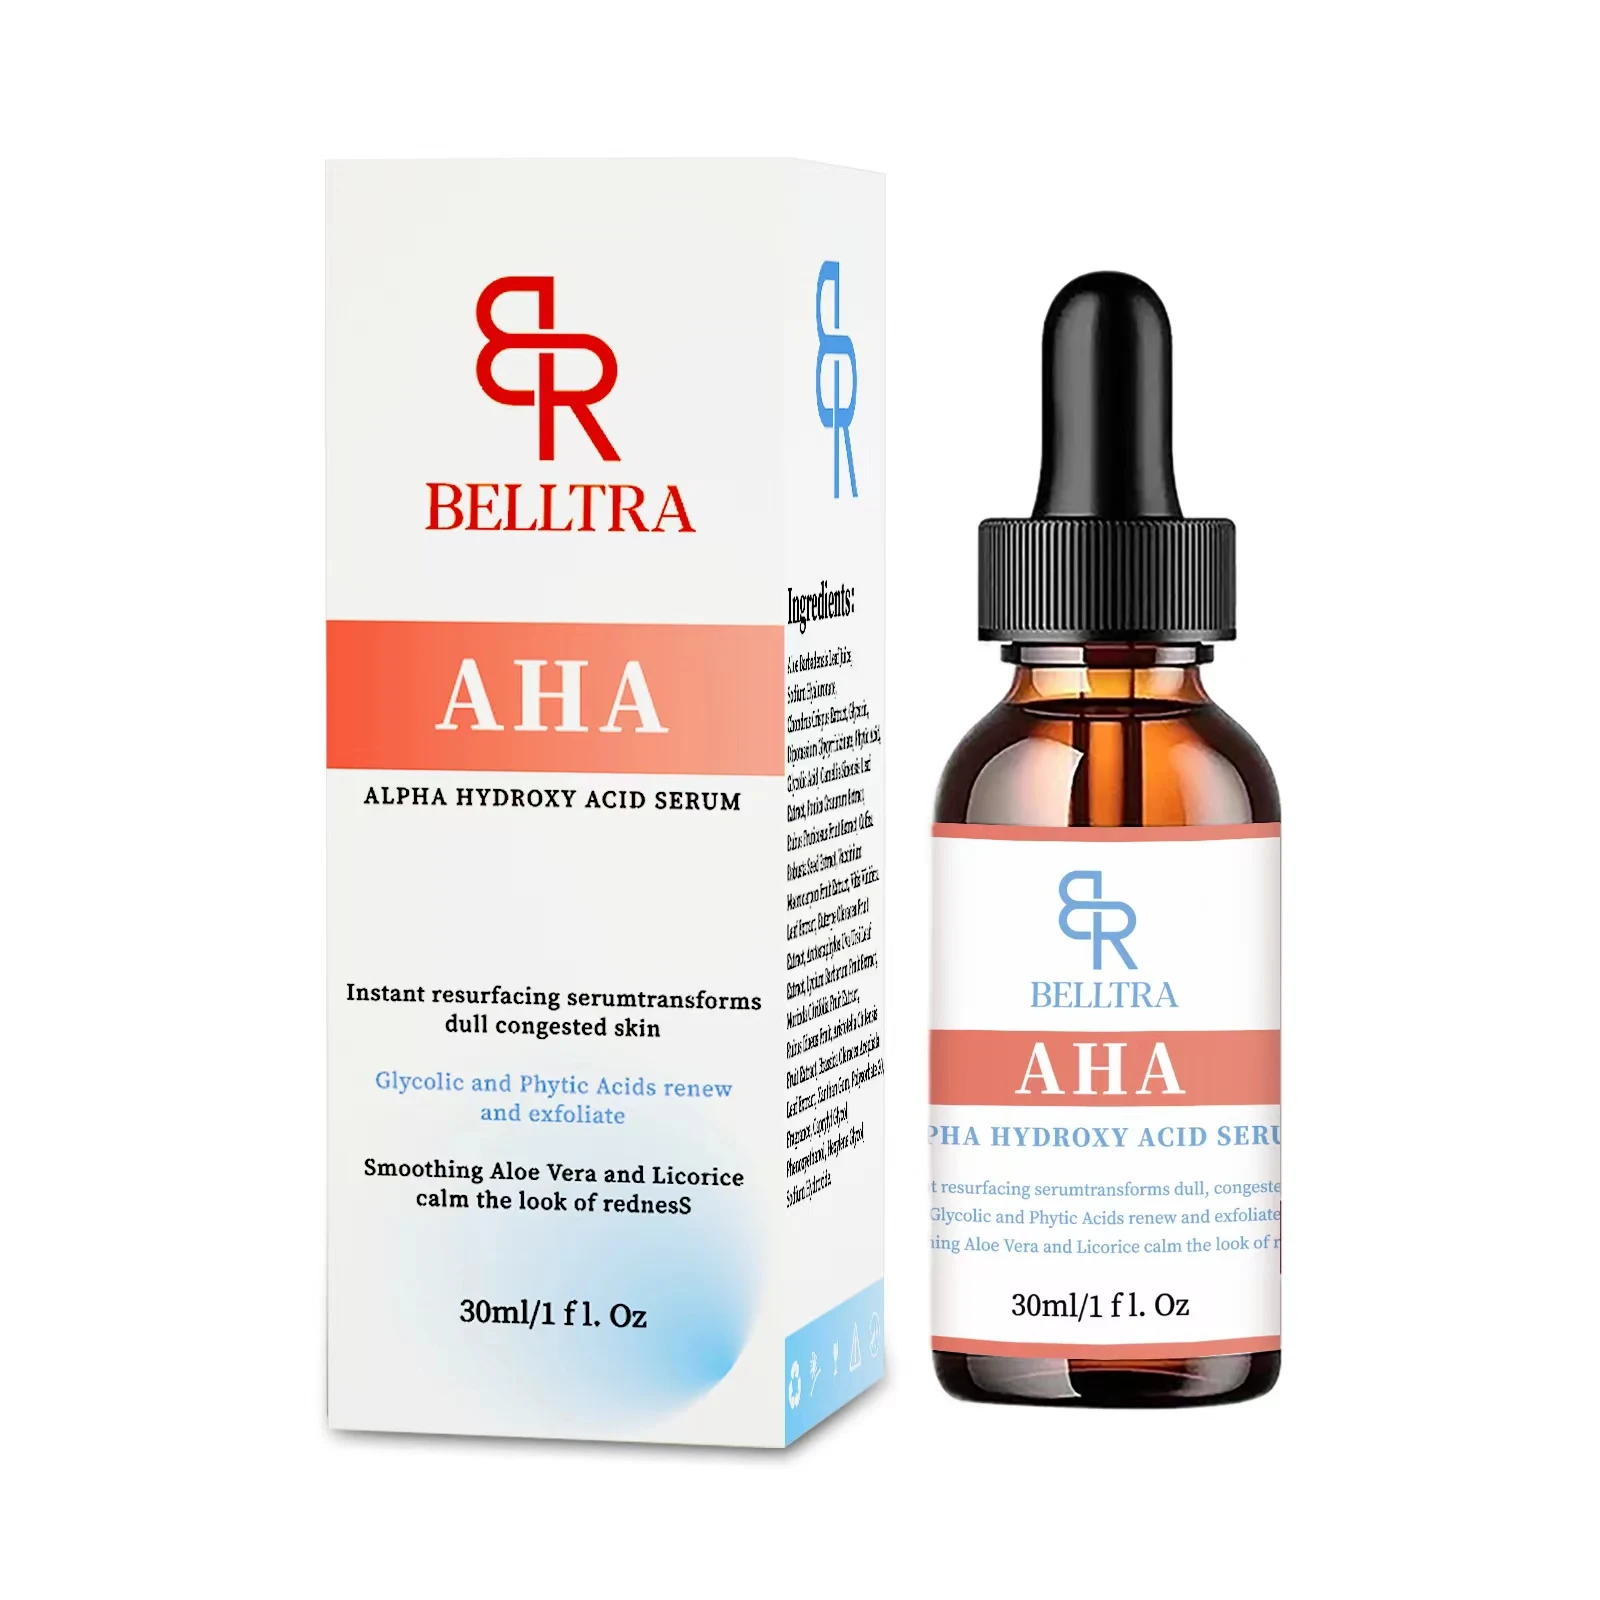 

ALPHA HYDROXY ACID SERUM Firming Lifting Anti-Aging Moisturizer Whitening Wrinkle Fine Lines Remove Spots Face Skin Care Serum